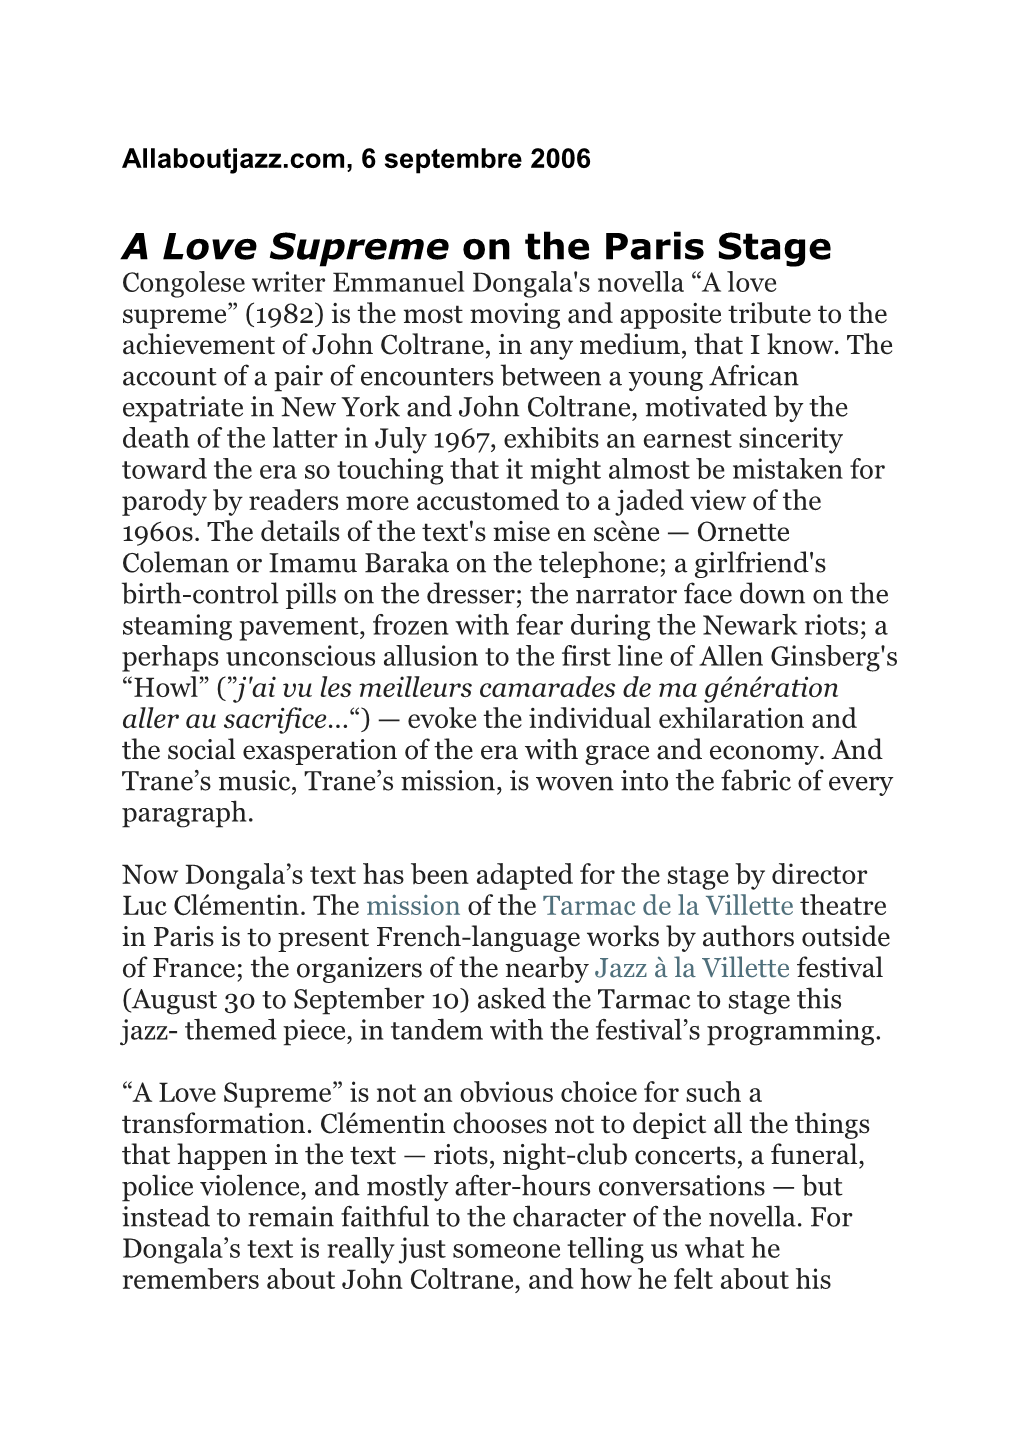 A Love Supreme on the Paris Stage